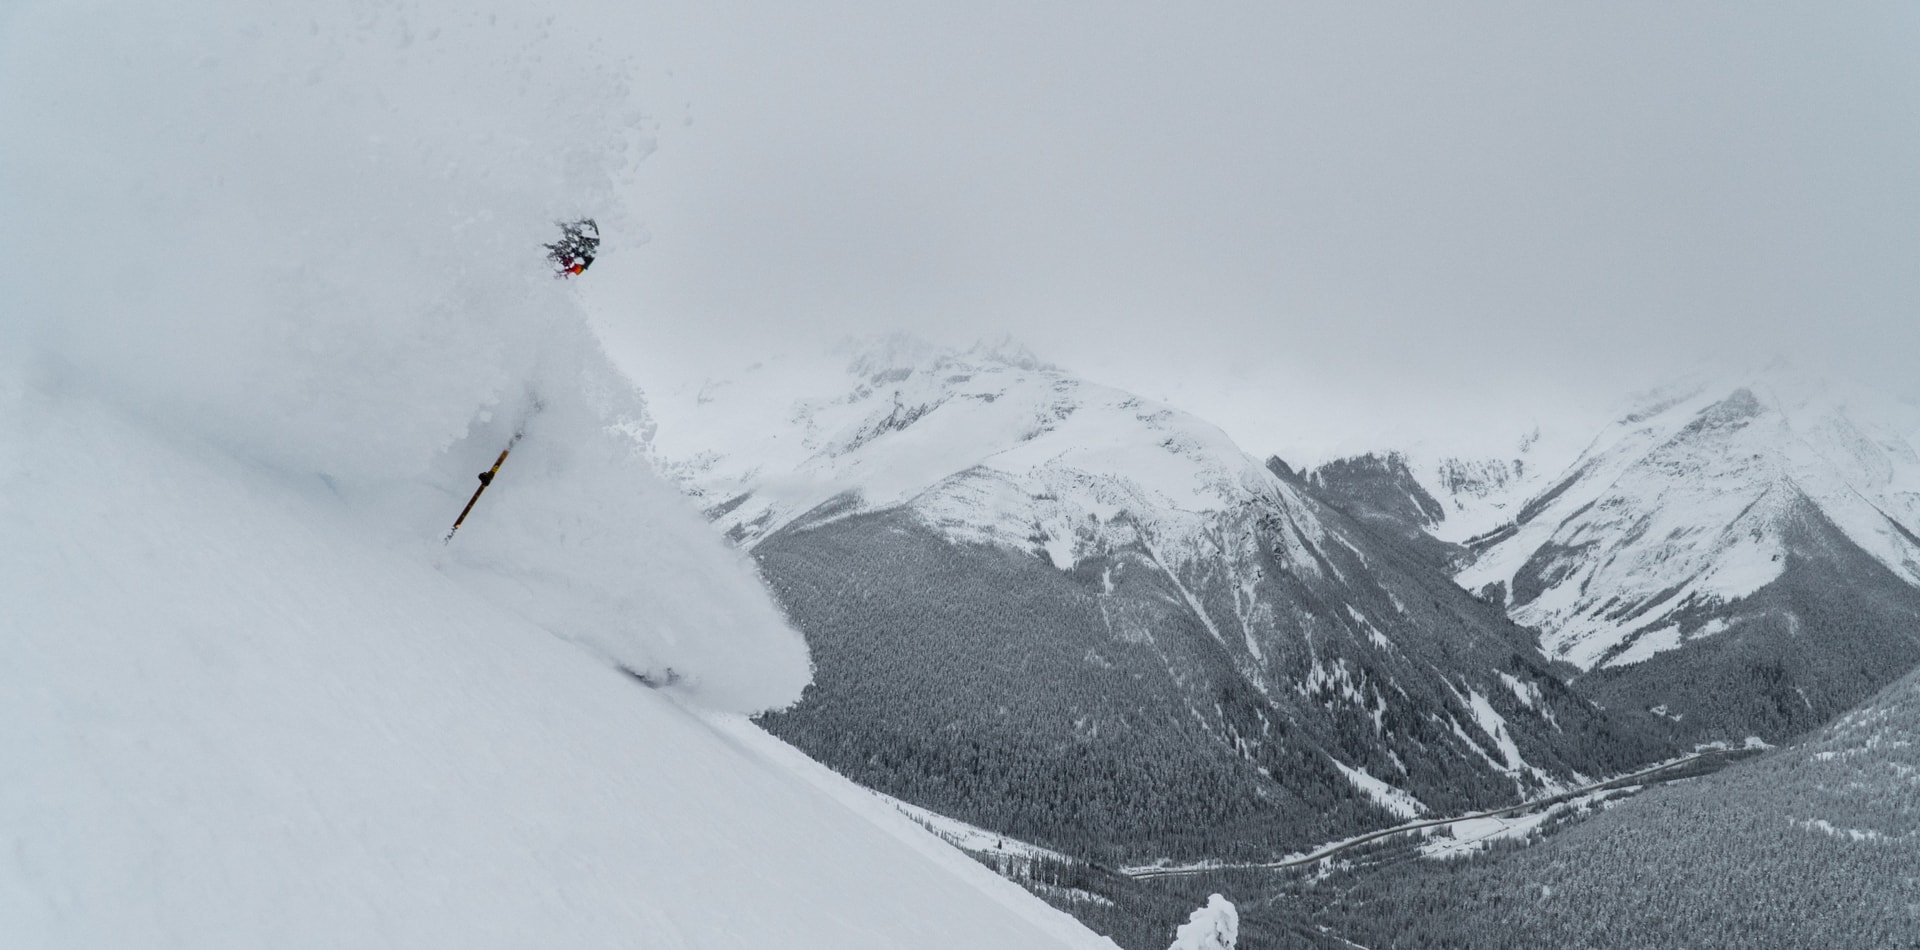 skier bursting through a cloud of powder snow in rogers pass